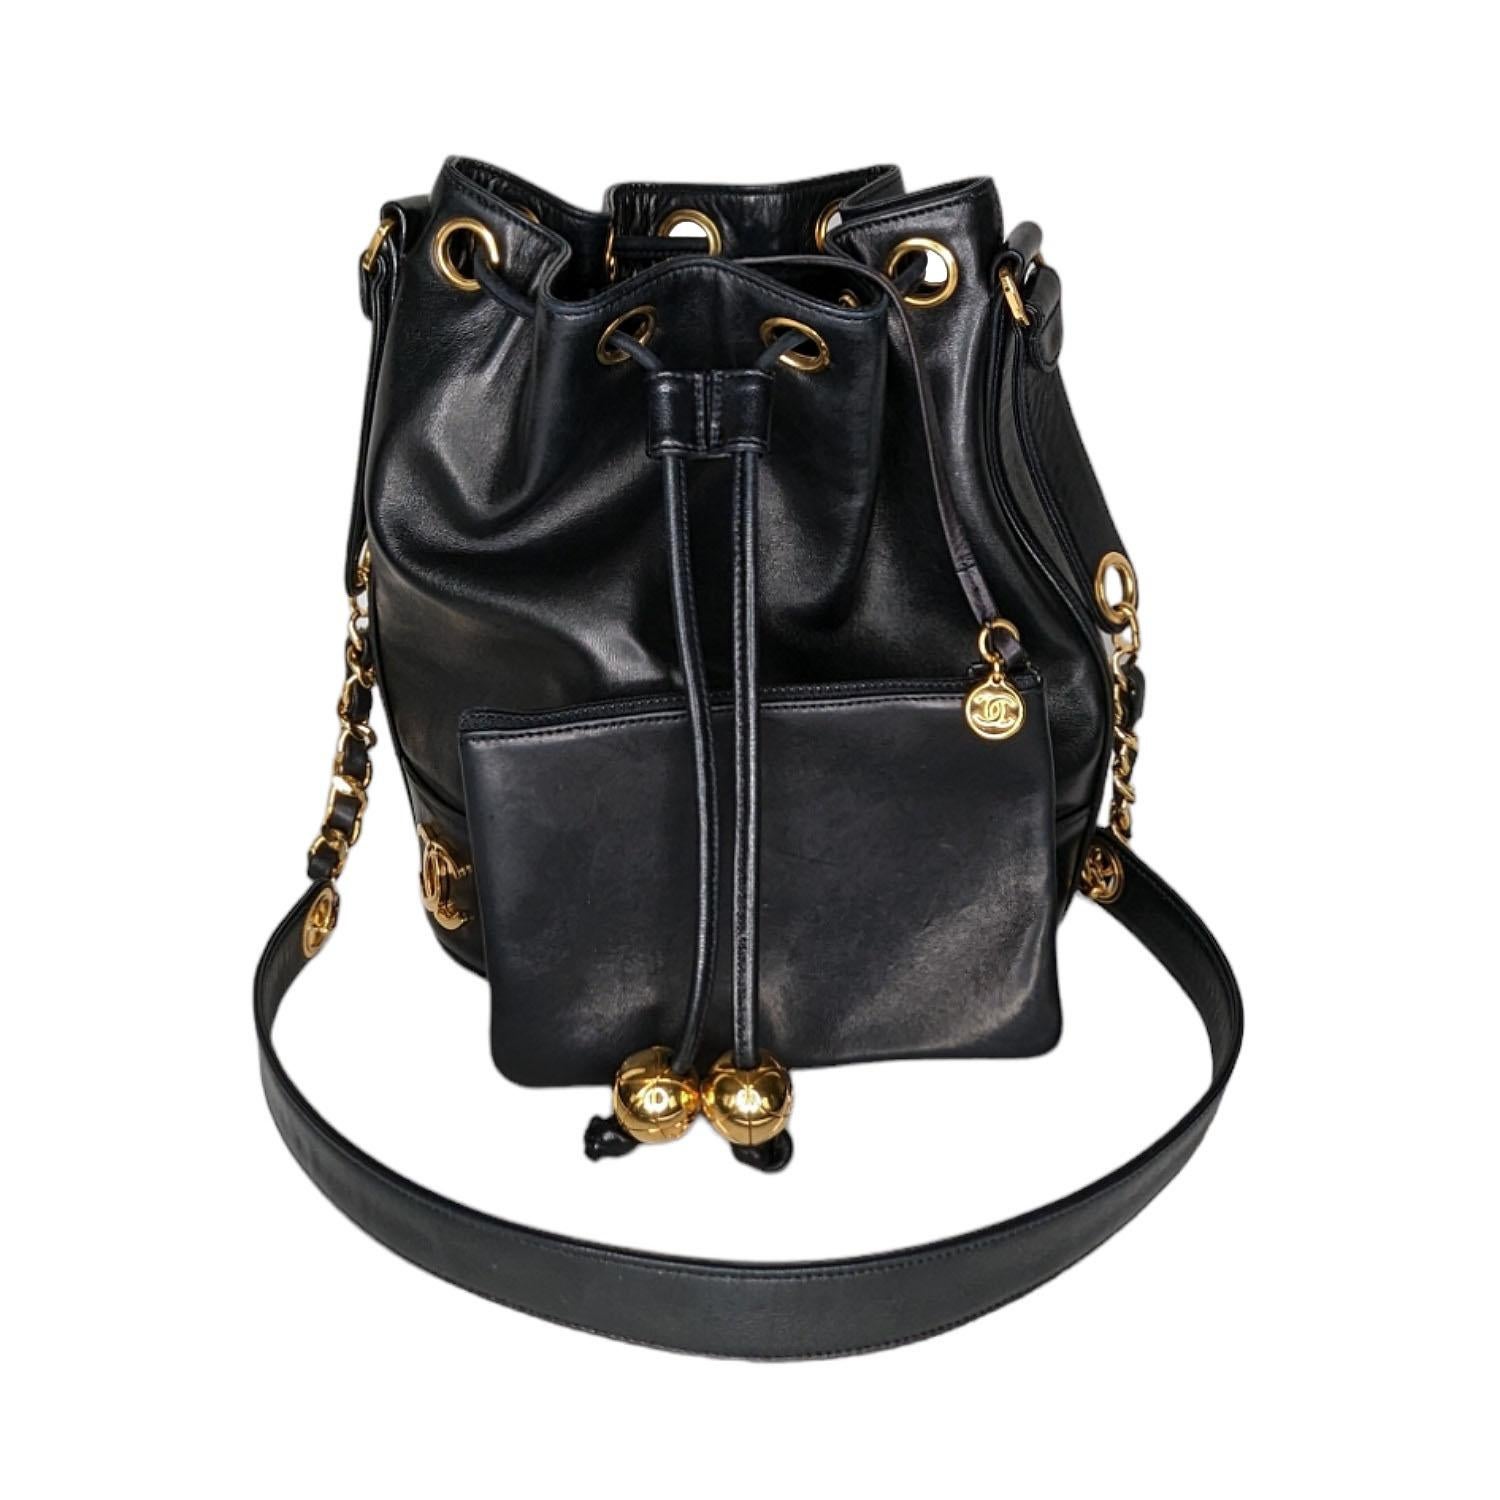 Chanel Vintage Lambskin CC Drawstring Bucket Bag in Black. This stylish bucket-style shoulder bag is crafted of grained calfskin leather. The bag features six CC logos in gold (three in the front and three in the back) and a gold chain link and